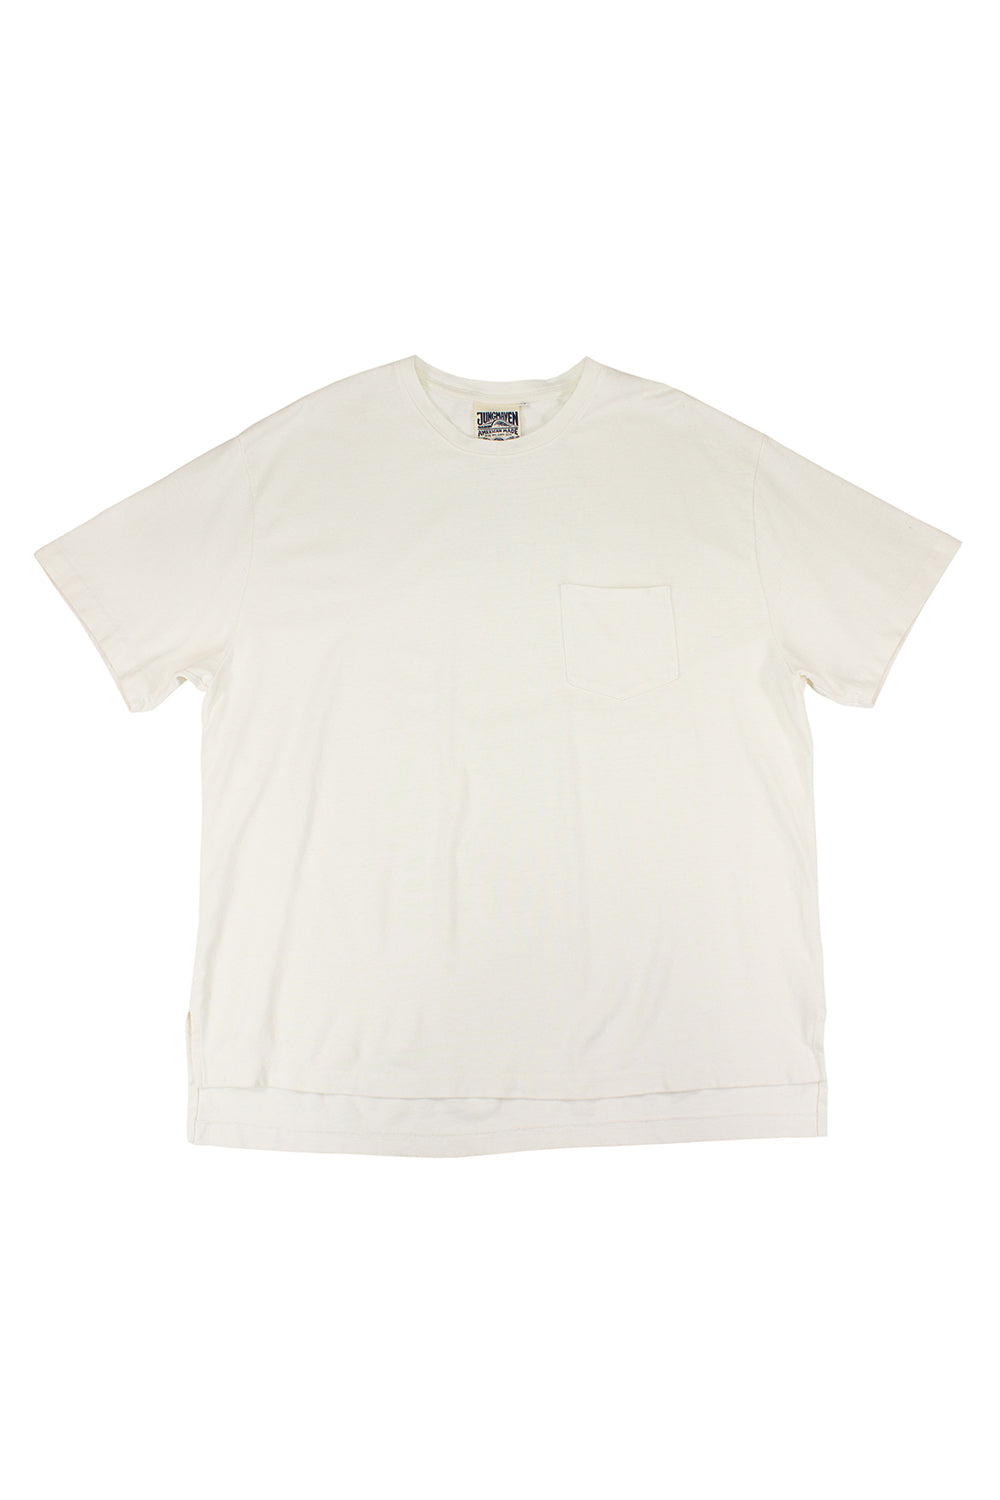 Big Tee | Jungmaven Hemp Clothing & Accessories / Color: Washed White